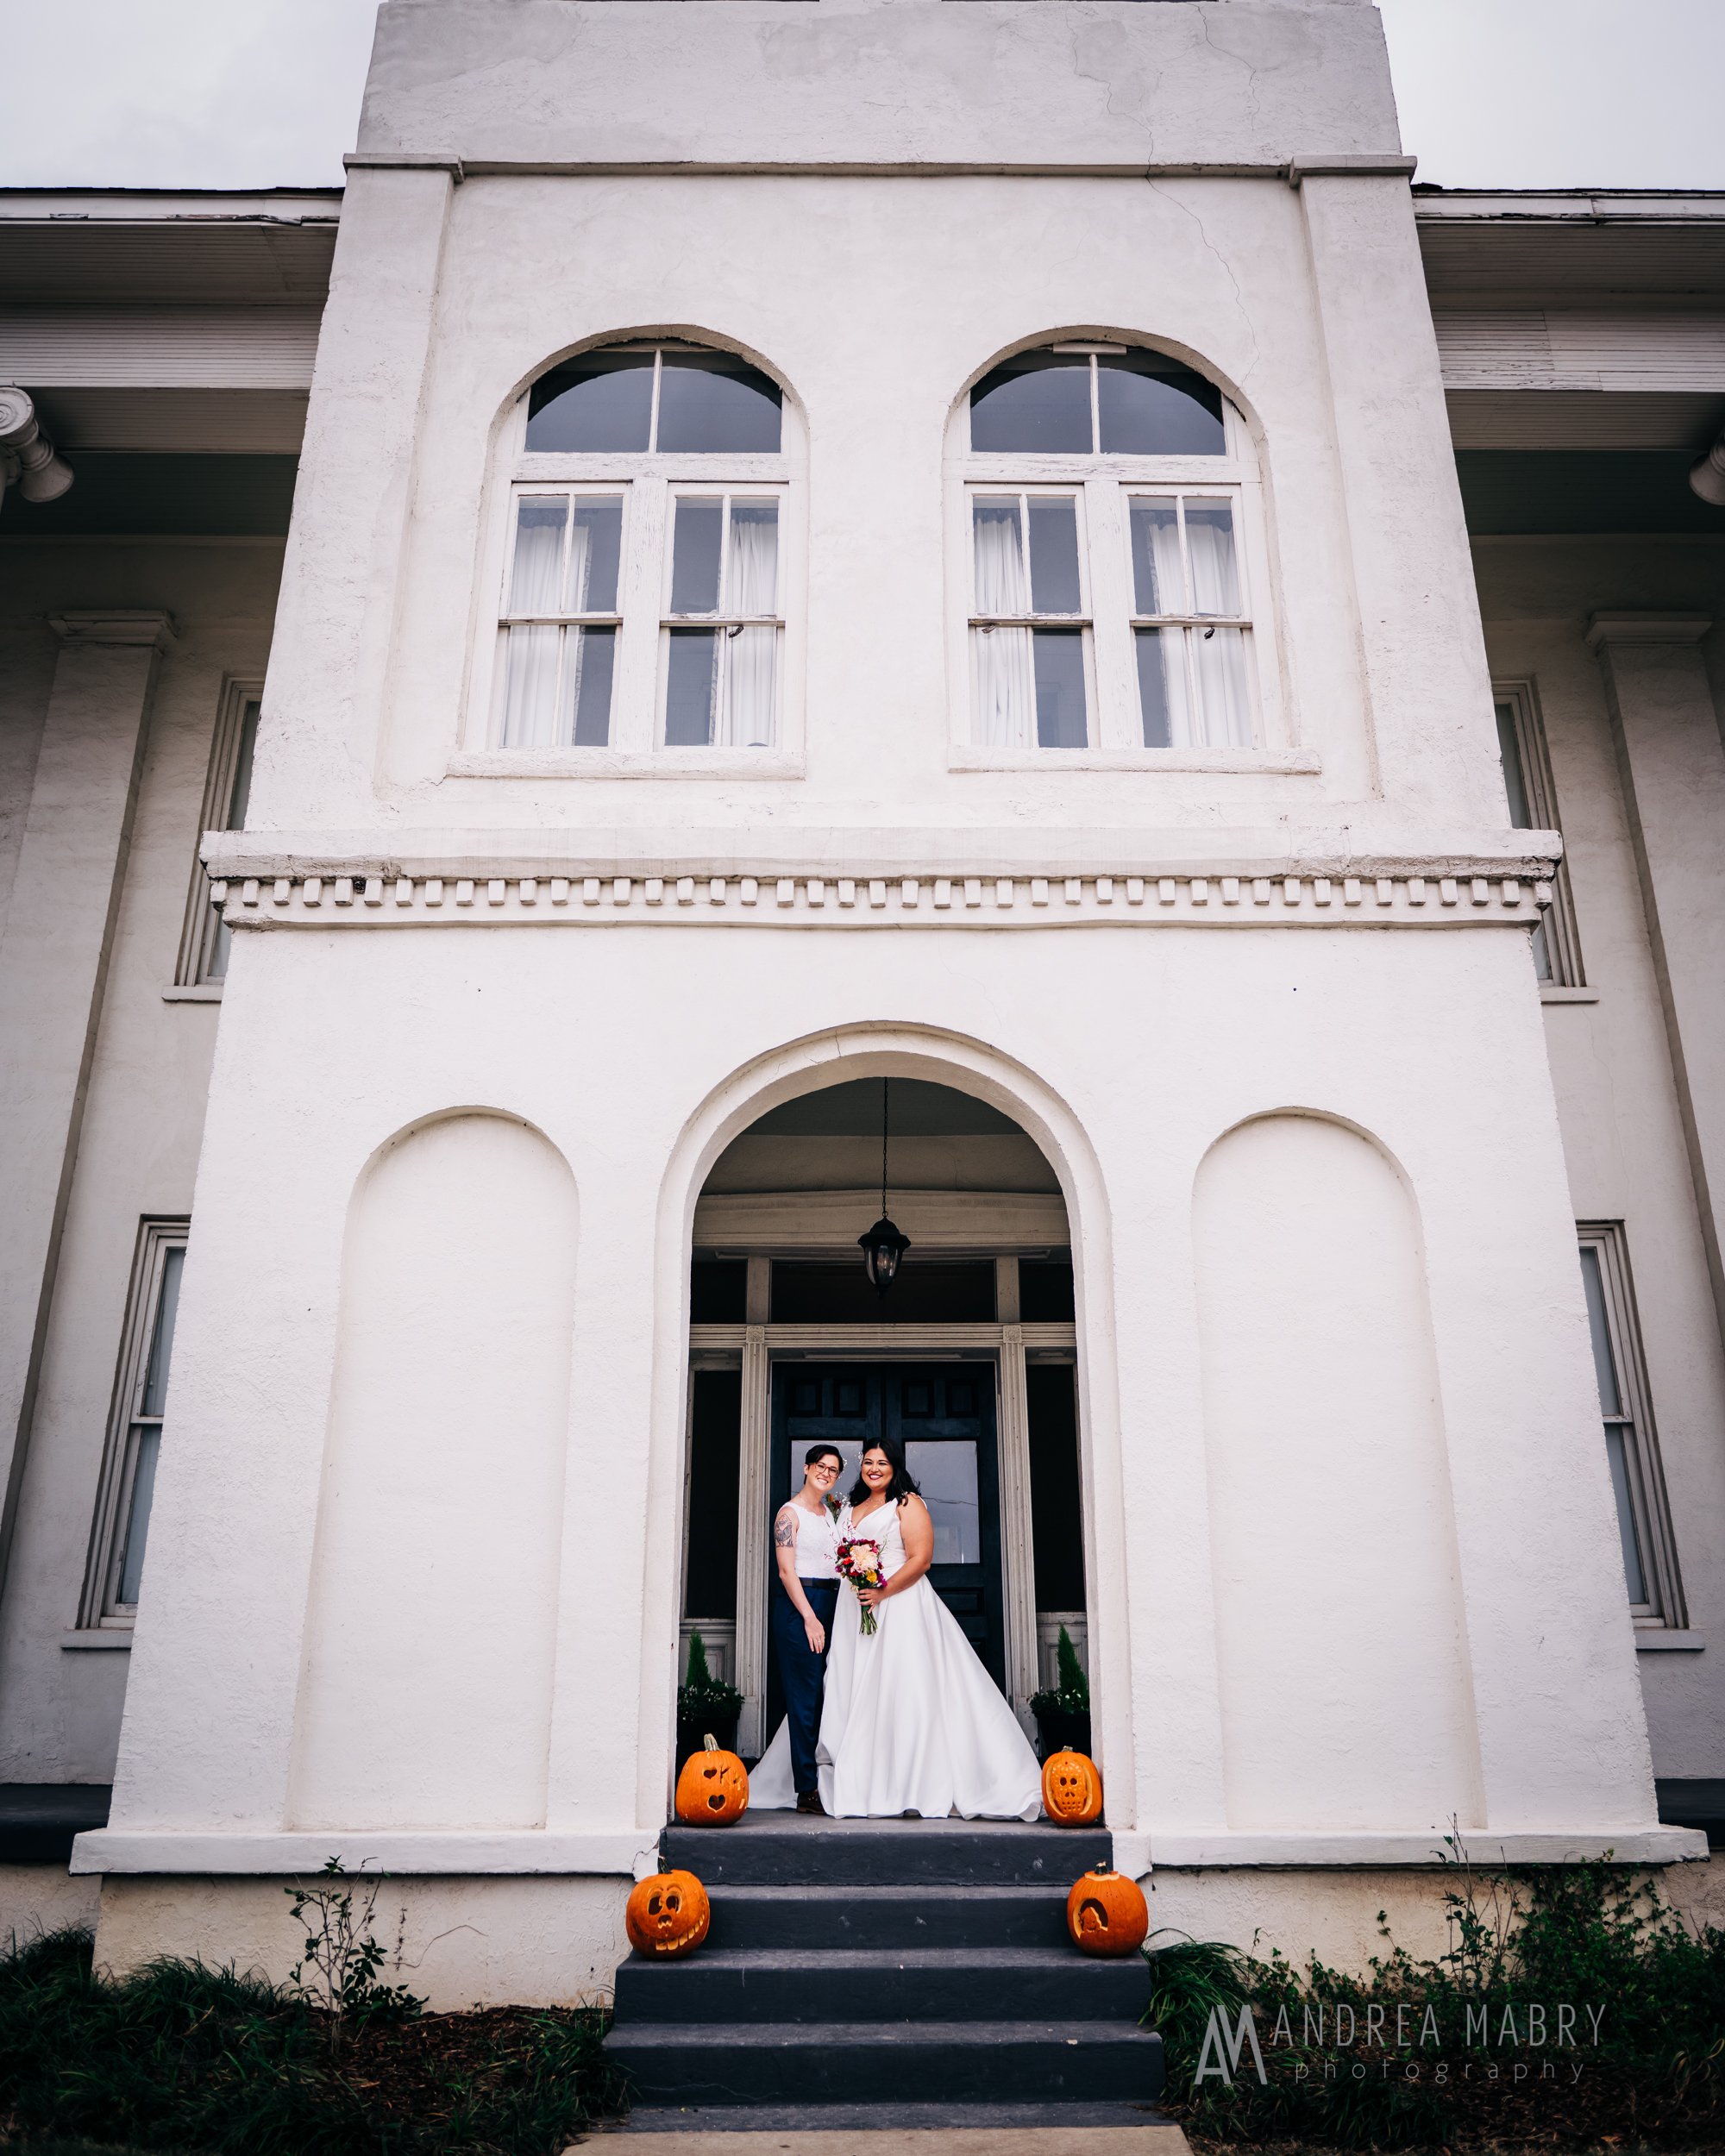 Blog — Andrea Mabry Birmingham and New Orleans Wedding Photographer hq nude image